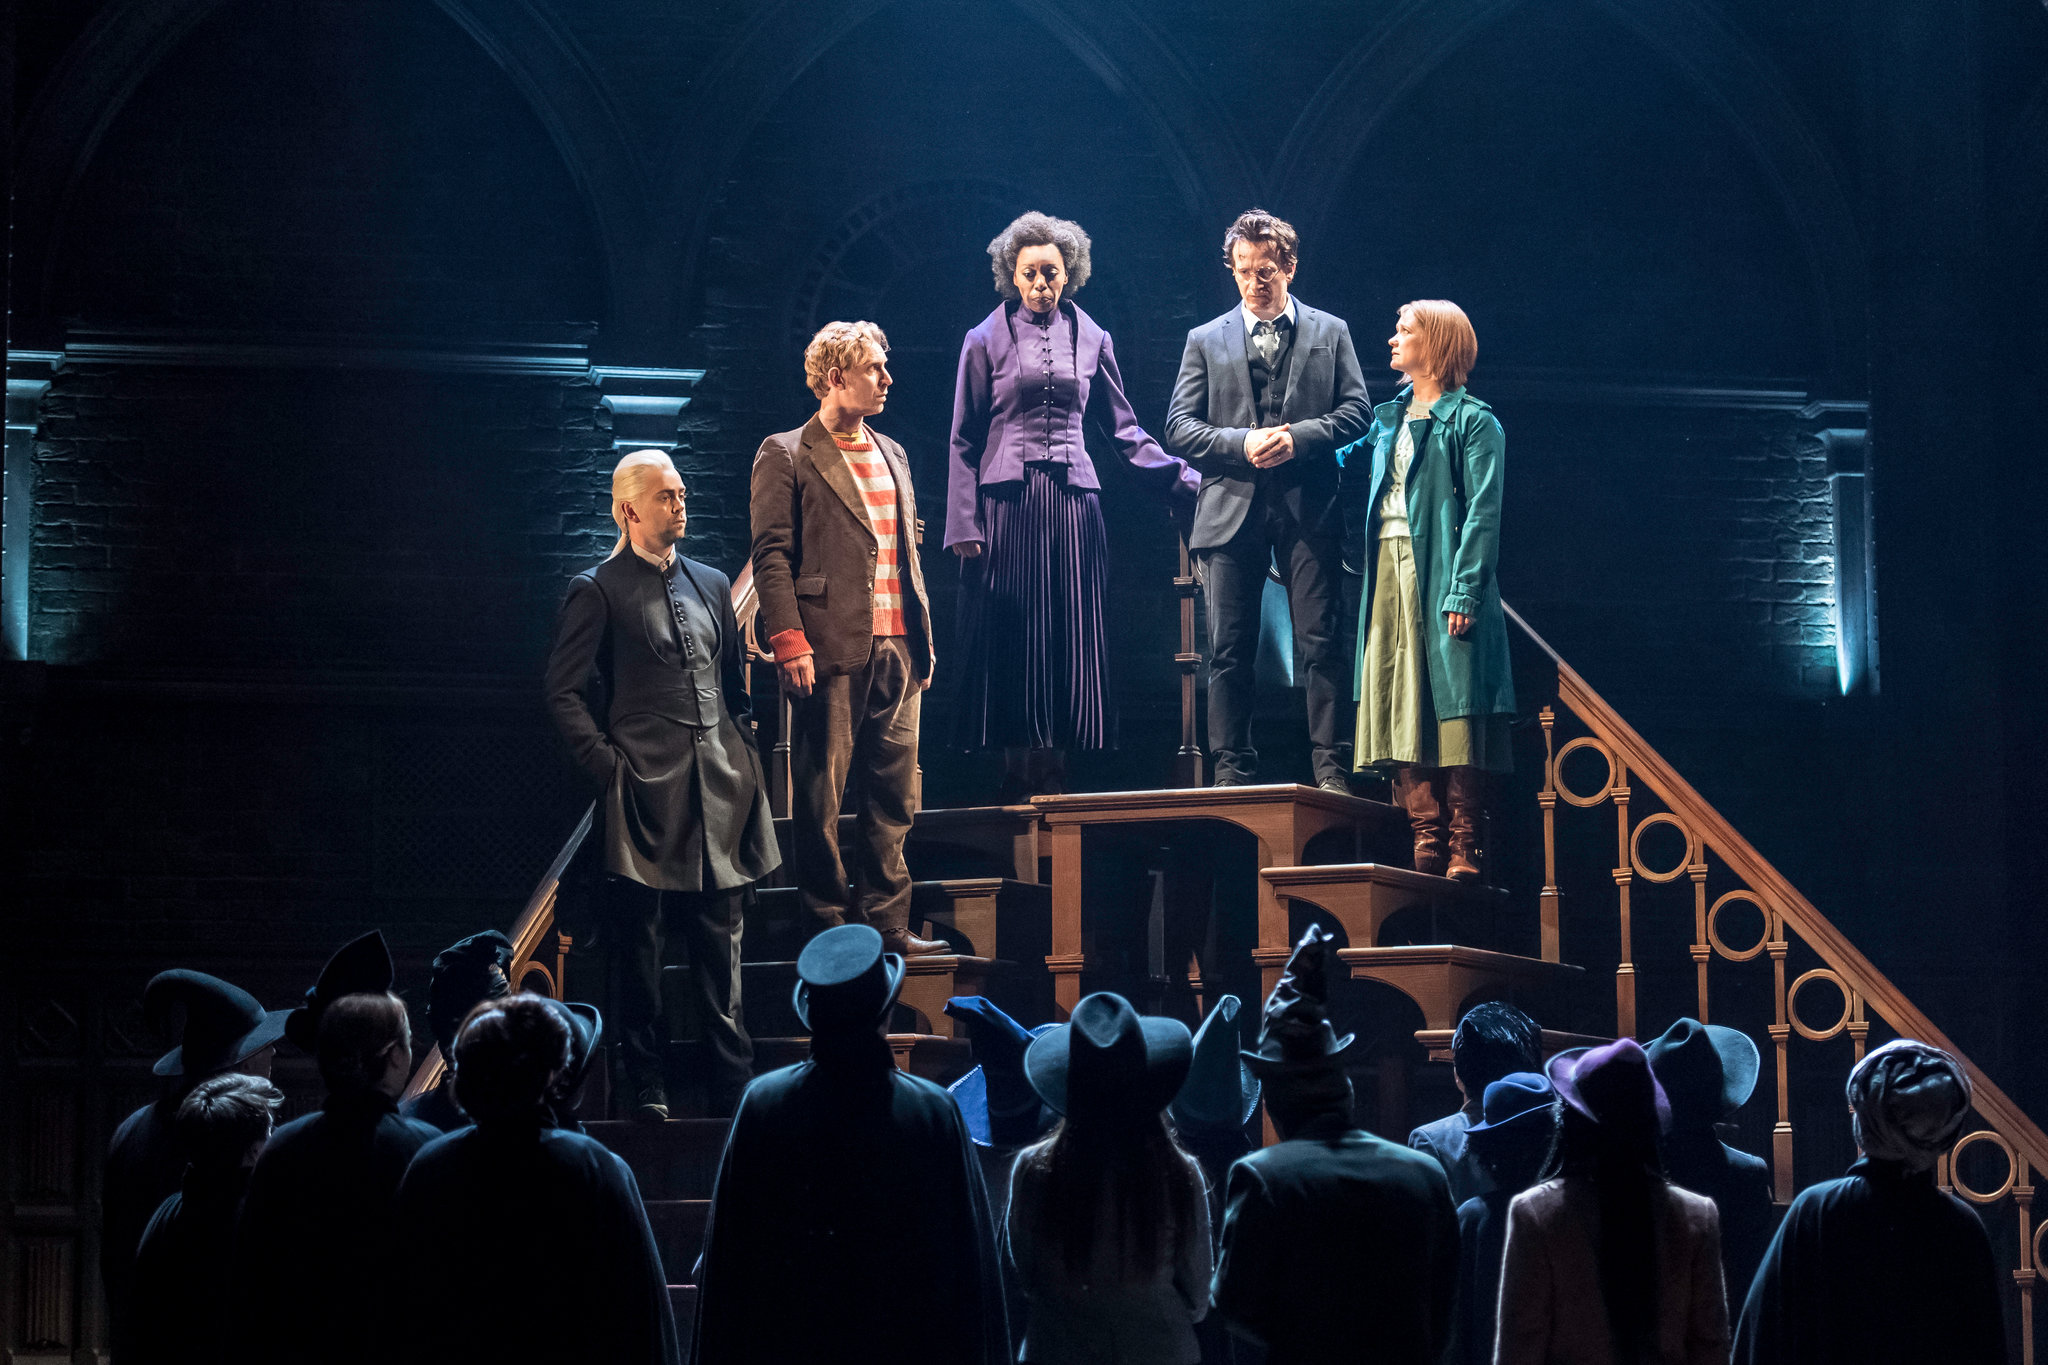 Harry Potter and the Cursed Child - Part 1 & 2 (5/21 7:30PM & 5/22 7:30PM) at Lyric Theatre